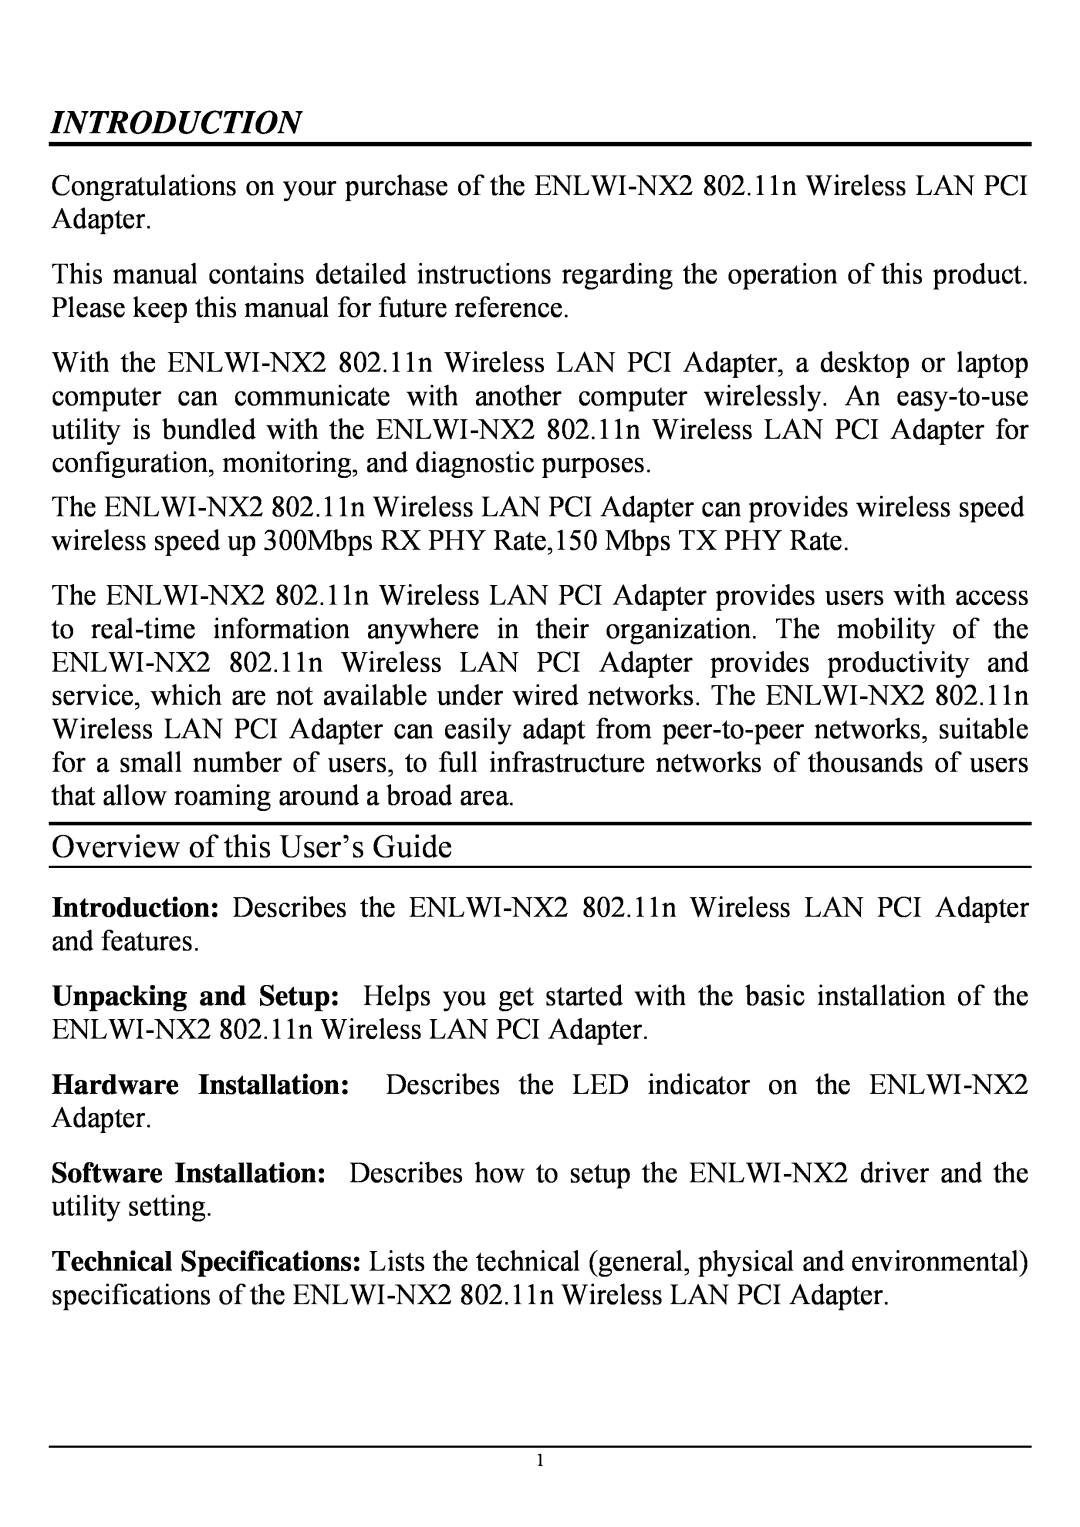 Encore electronic ENLWI-NX2 manual Introduction, Overview of this User’s Guide 